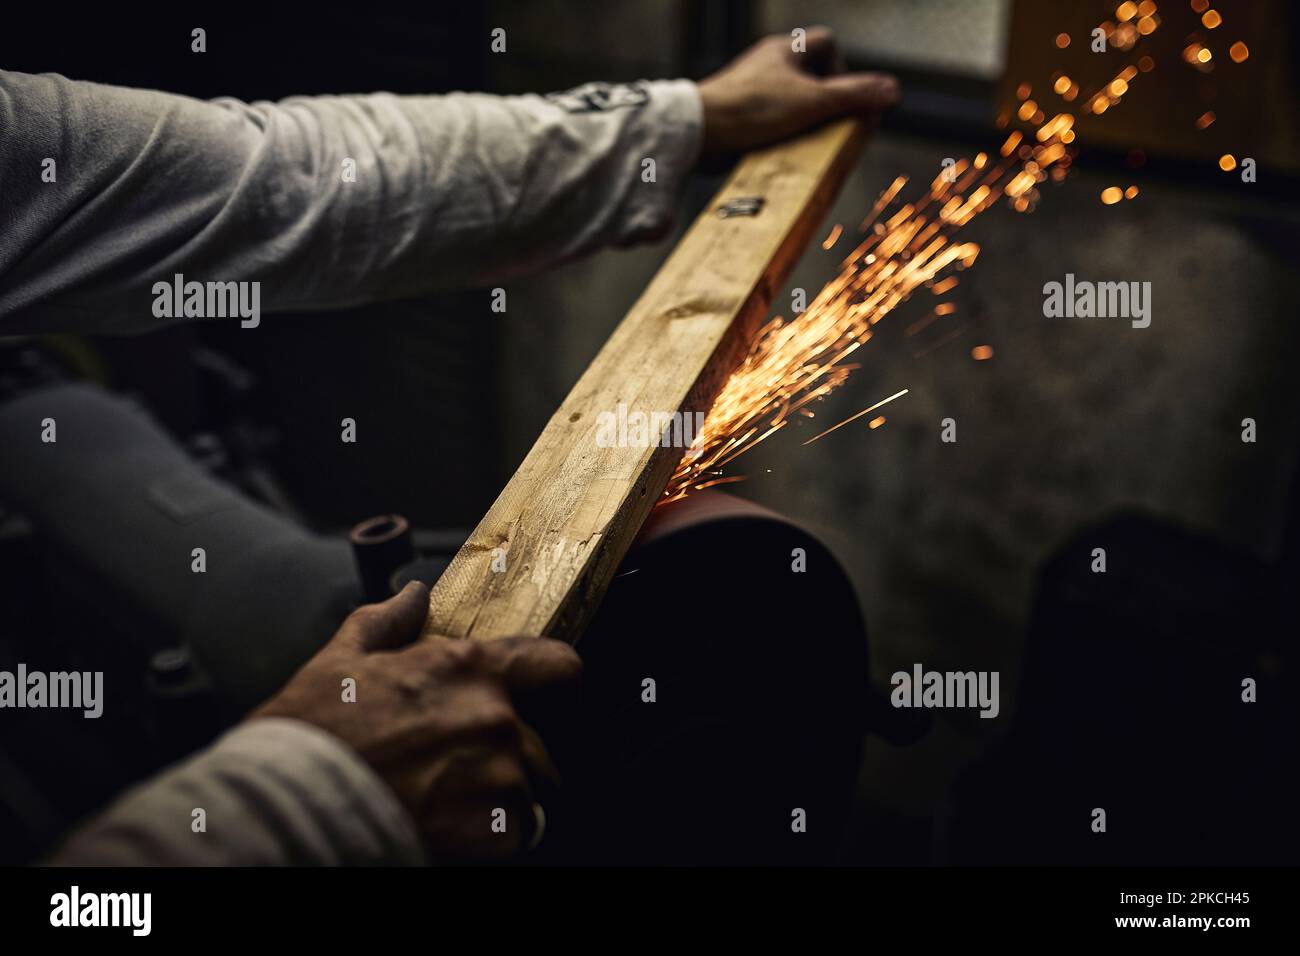 A man working at a cutlery factory with sparks flying Stock Photo